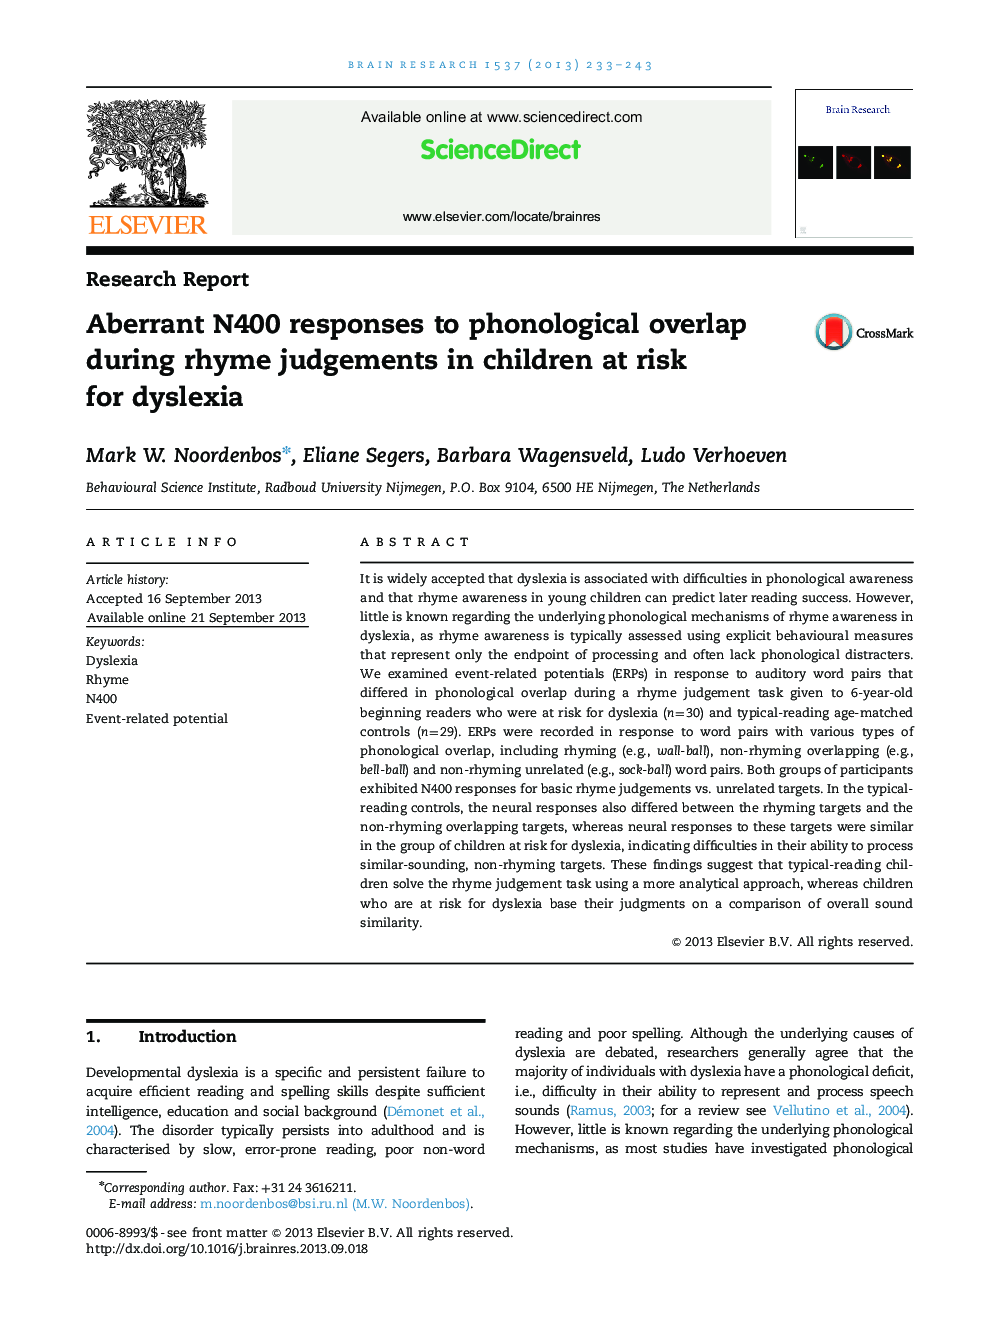 Research ReportAberrant N400 responses to phonological overlap during rhyme judgements in children at risk for dyslexia